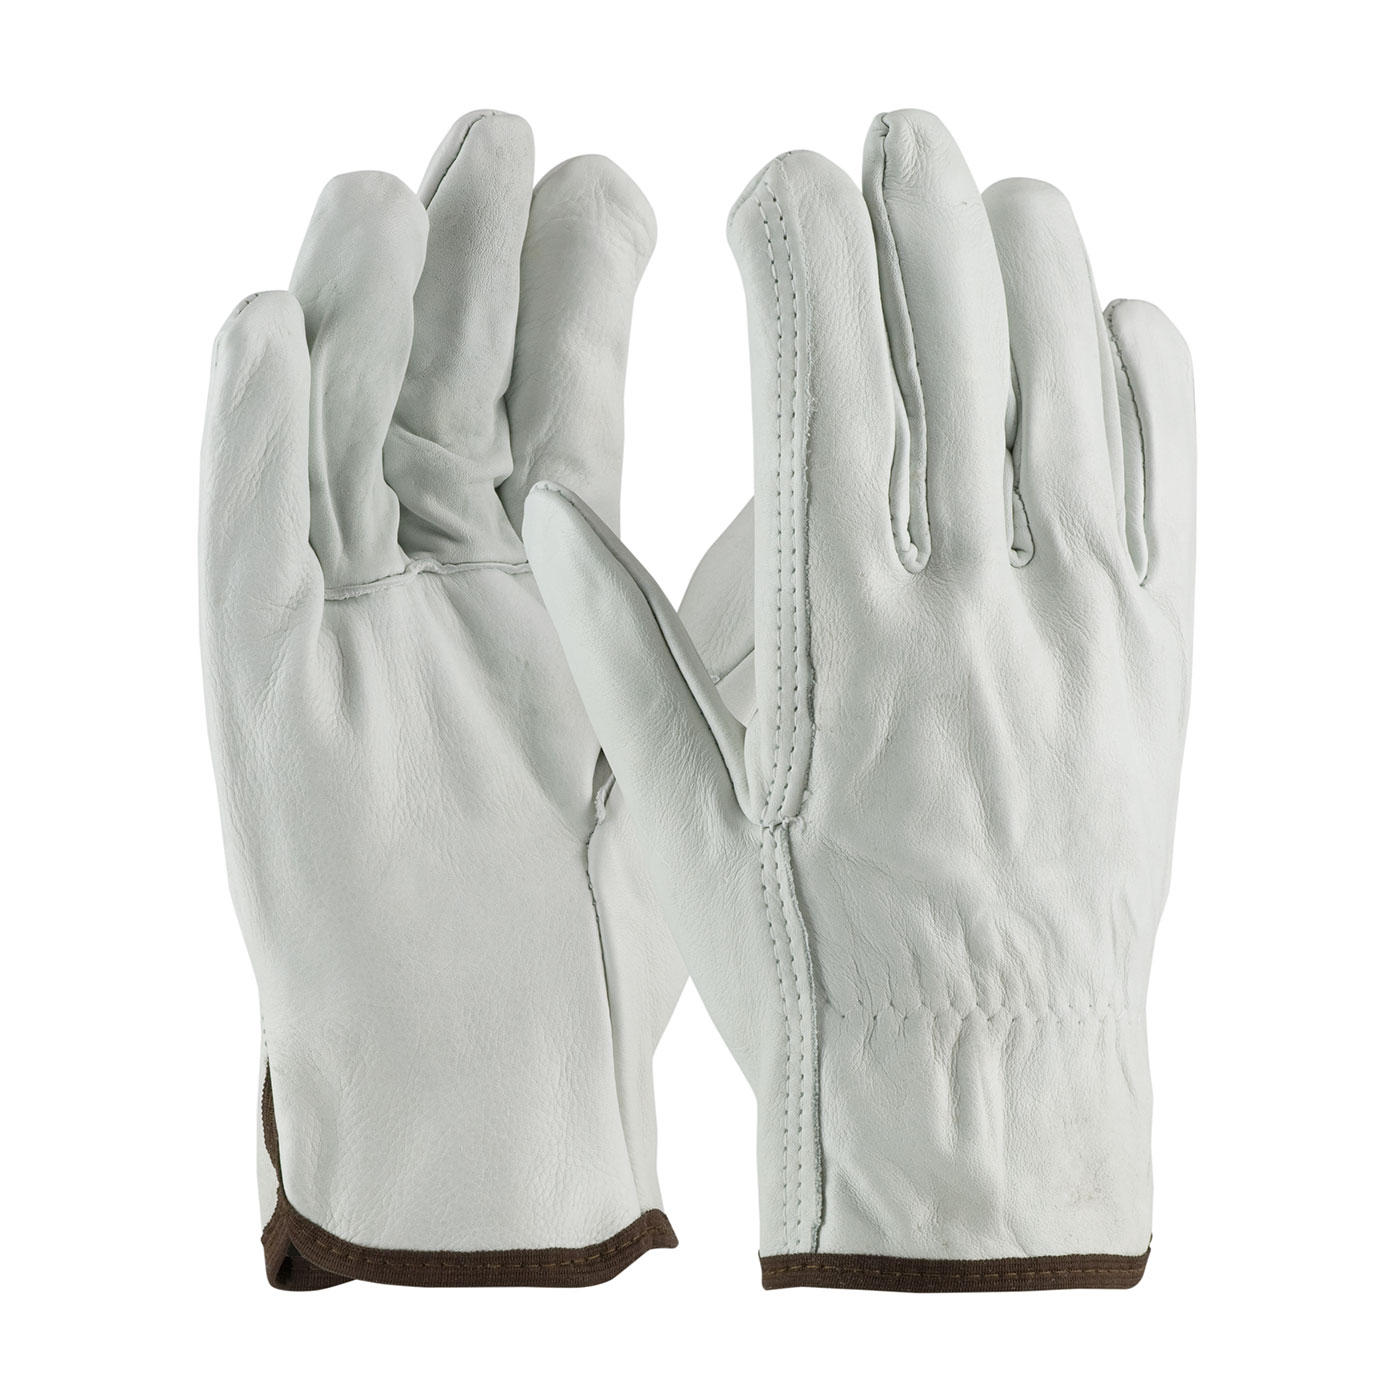 PIP 68-101/S Superior Grade Top Grain Cowhide Leather Drivers Glove - Straight Thumb - Small PID-68 101 S